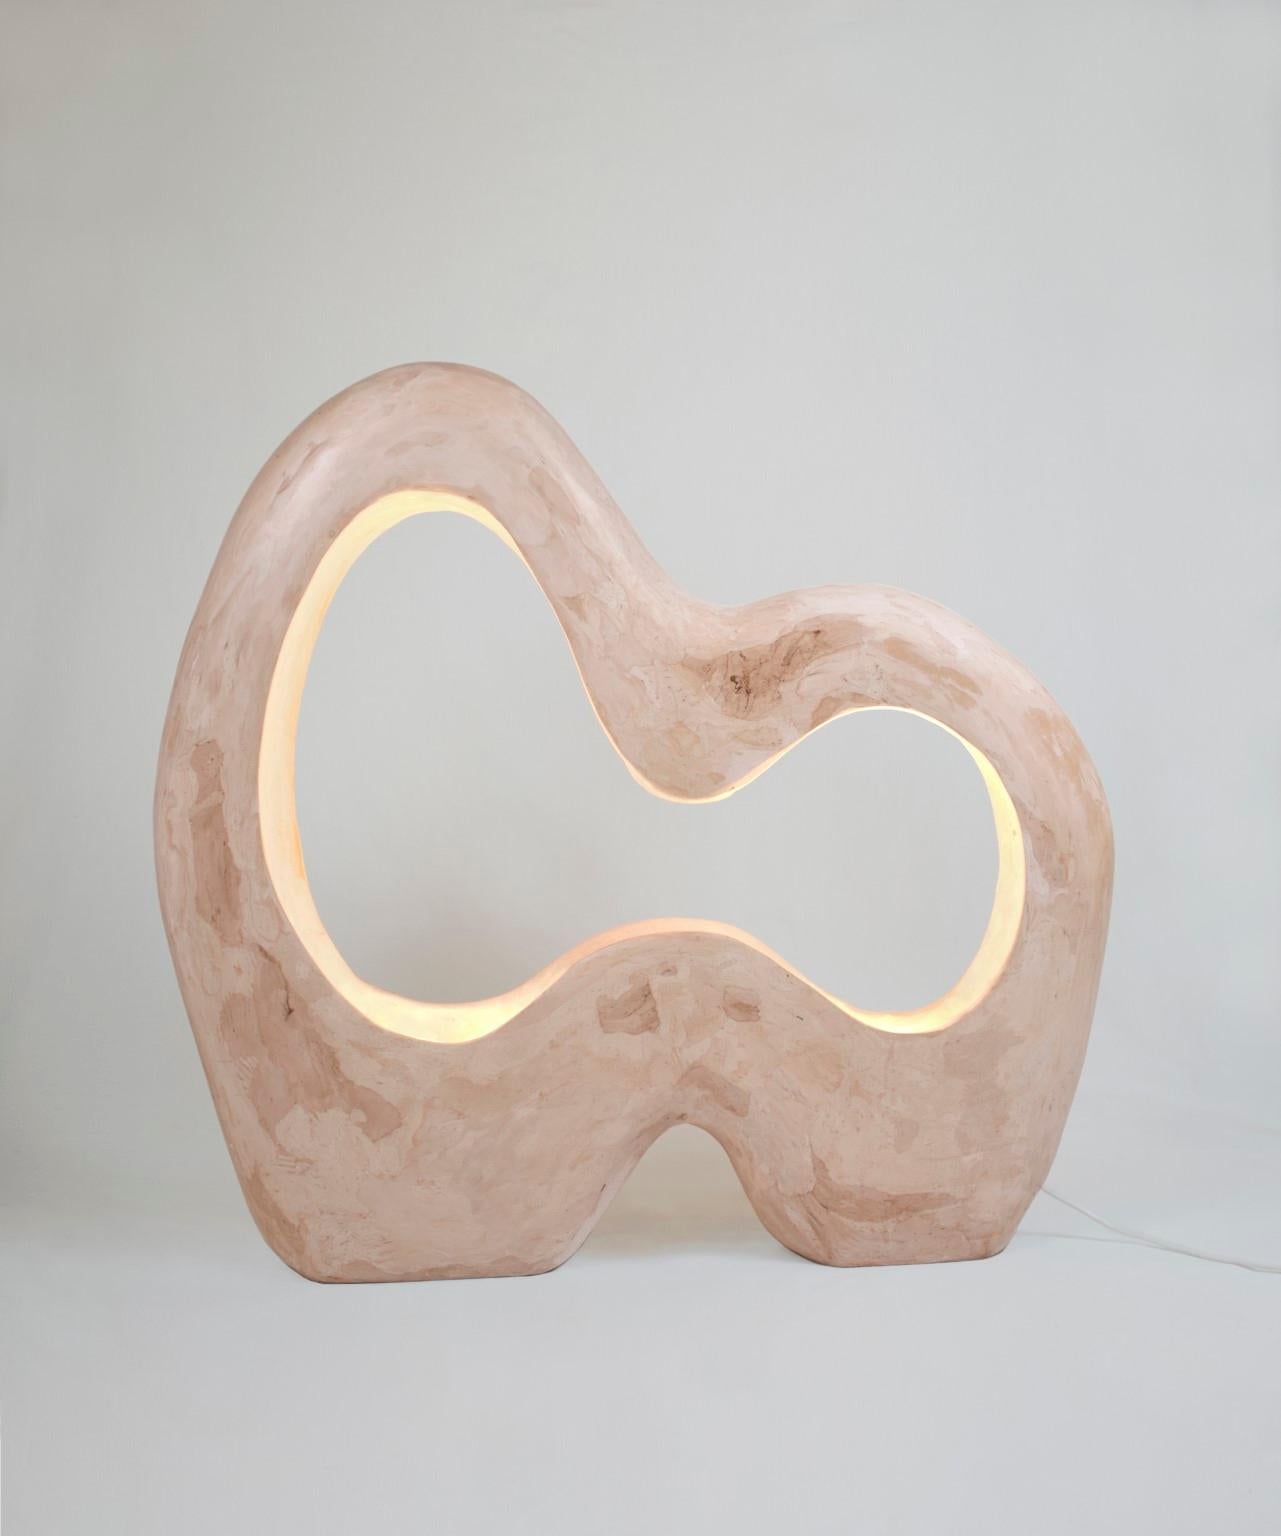 Infinite lamp by Alicja Strzyzynska
Dimensions: W 70 x D 12 x H 70 cm
Materials: Plaster
Color options available upon request.

The idea was born after deciding to reconnect with my family and my grandfather – a sculptor artist. Learning to